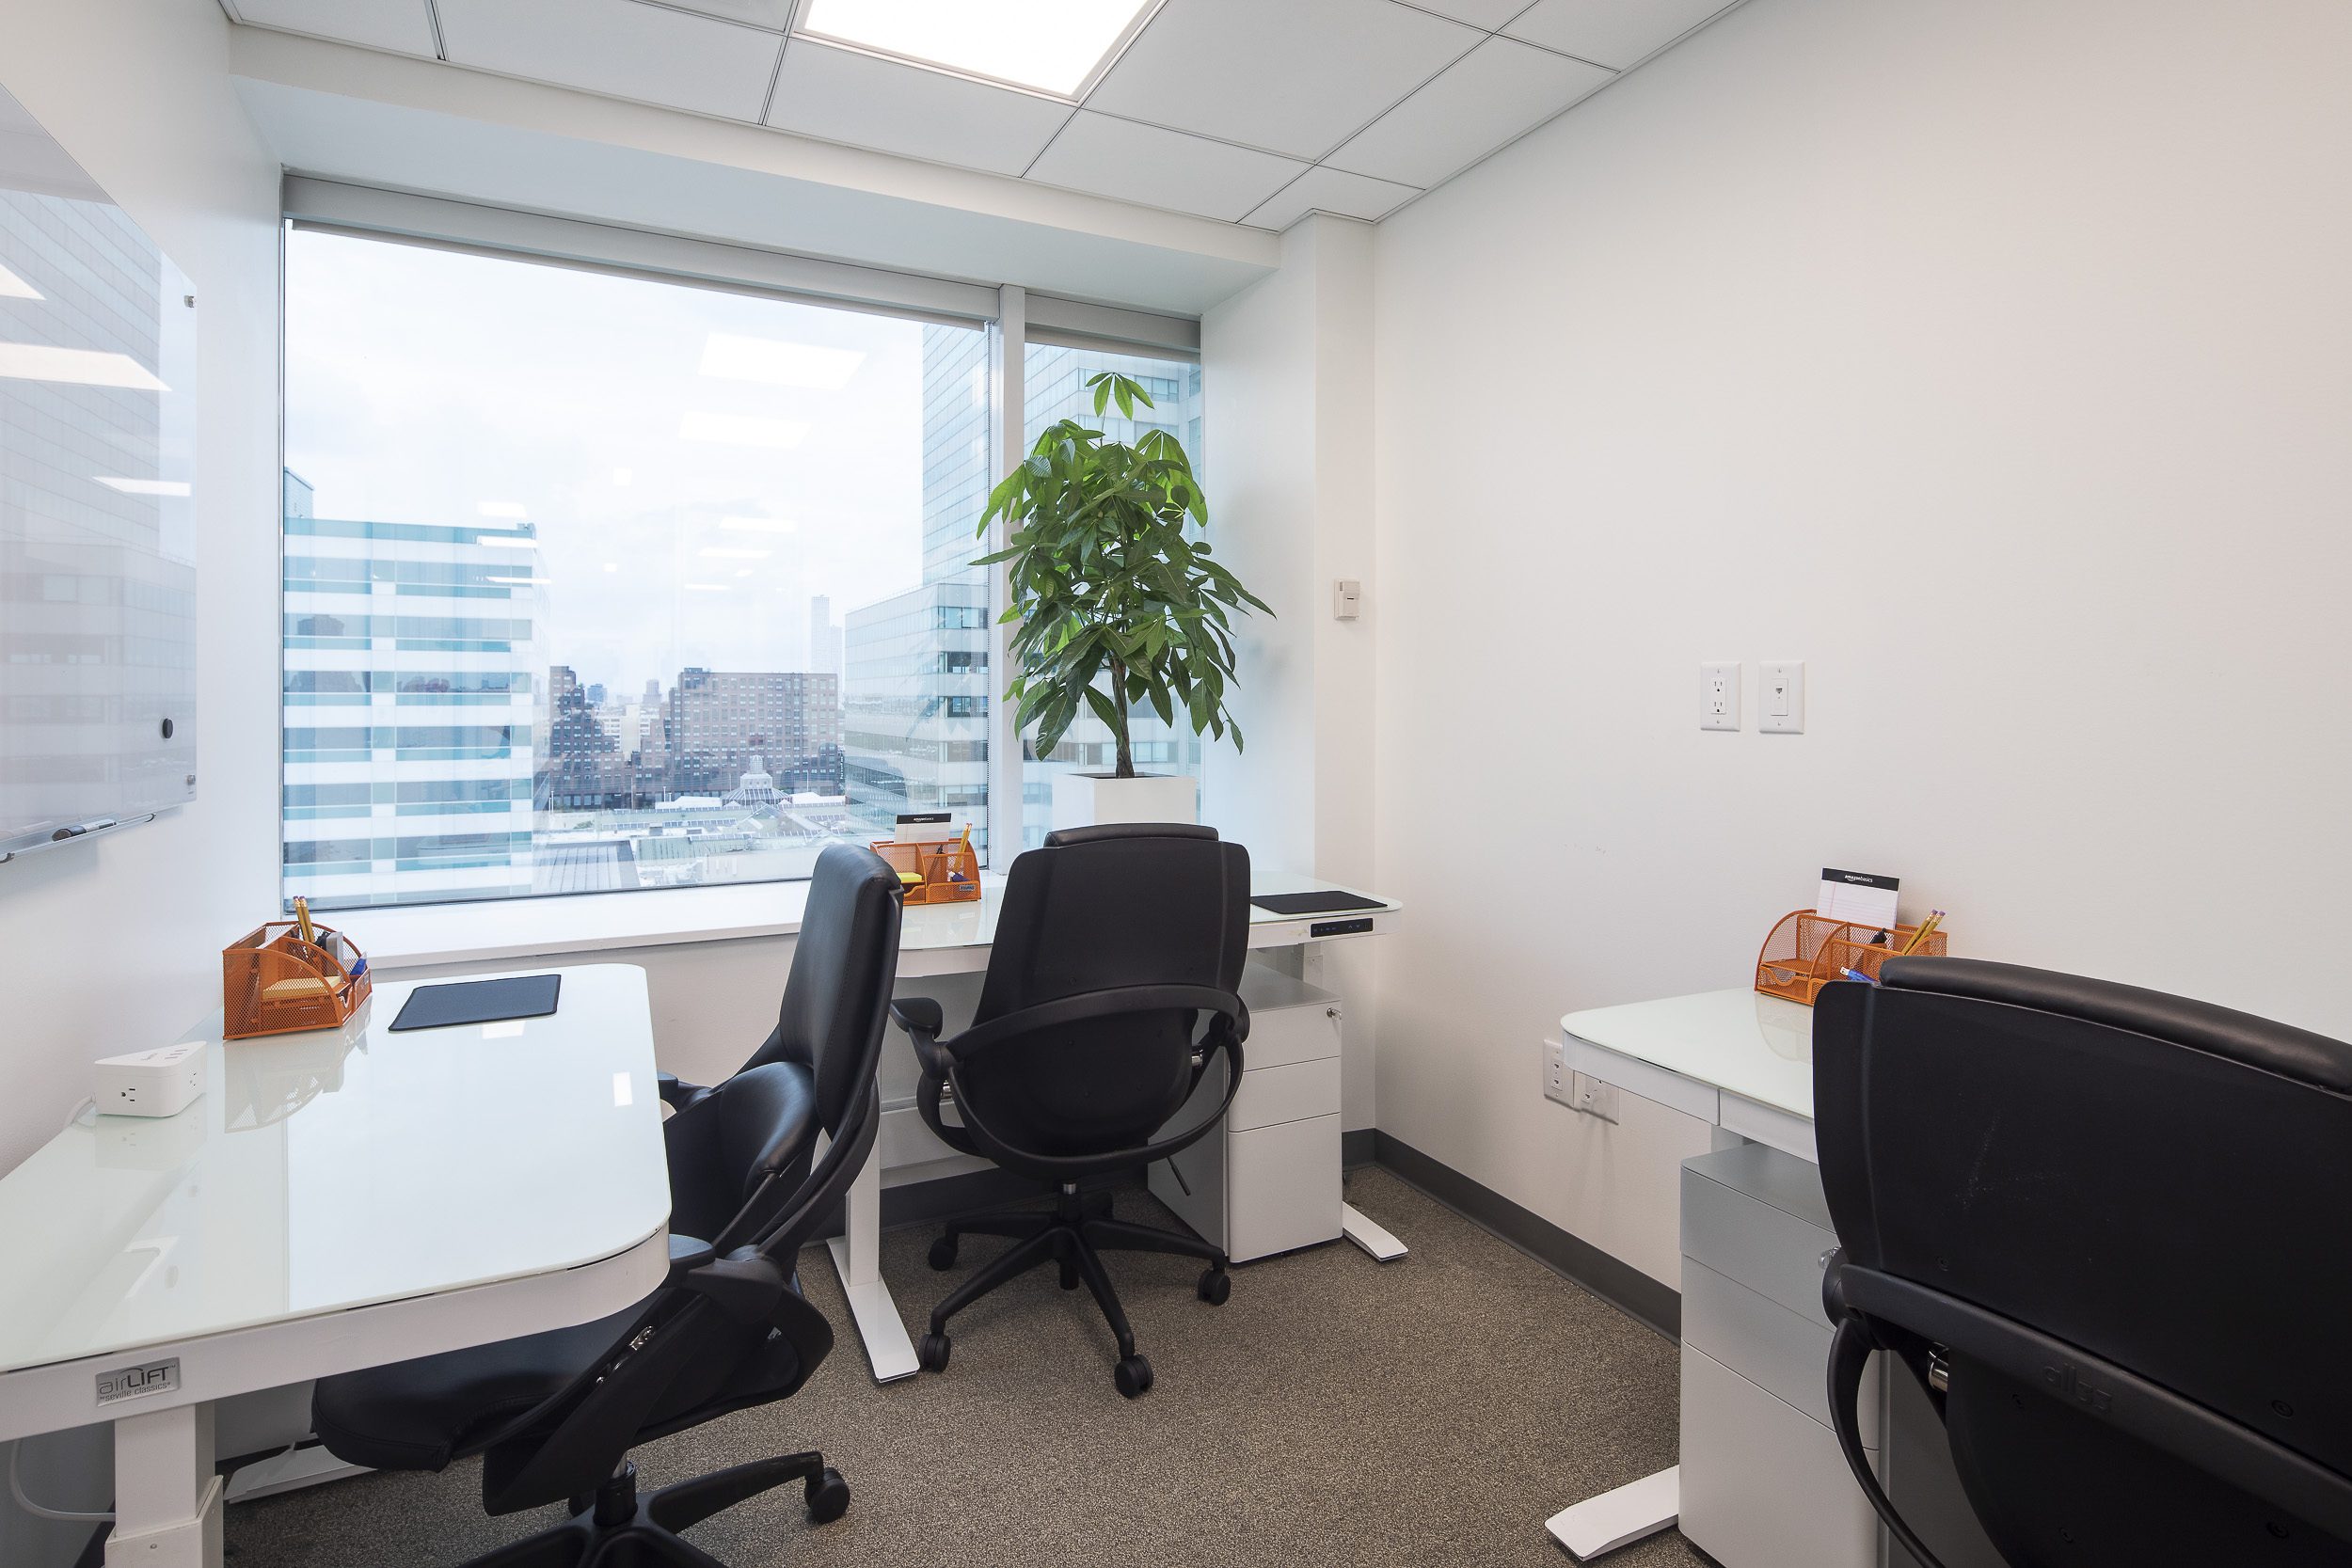 Rent luxurious private office space at affordable rates at no additional cost